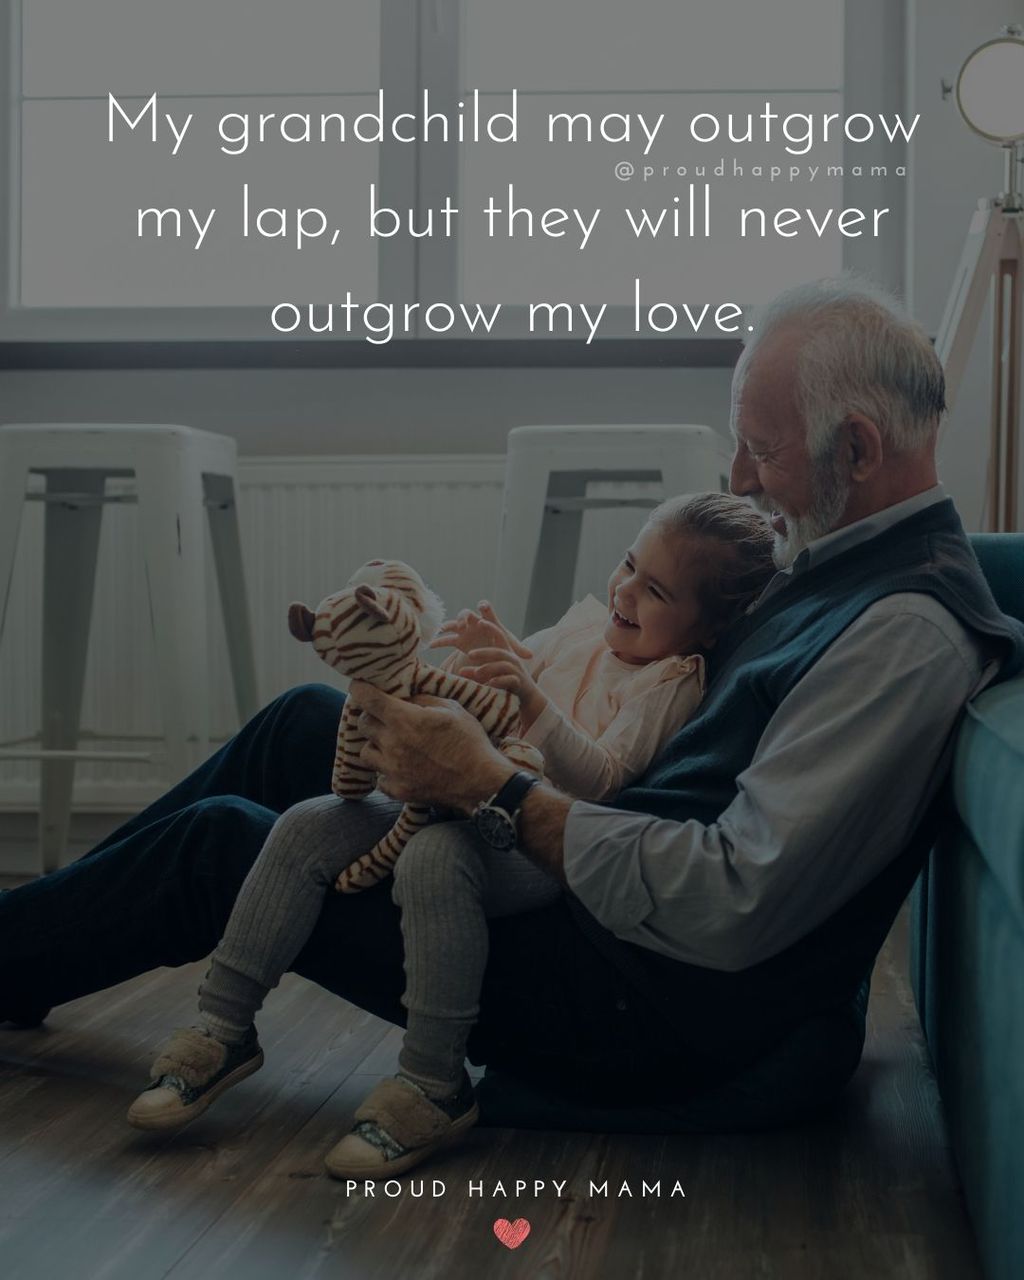 Quotes for Grandchildren - My grandchild my outgrow my lap, but they will never outgrow my love.